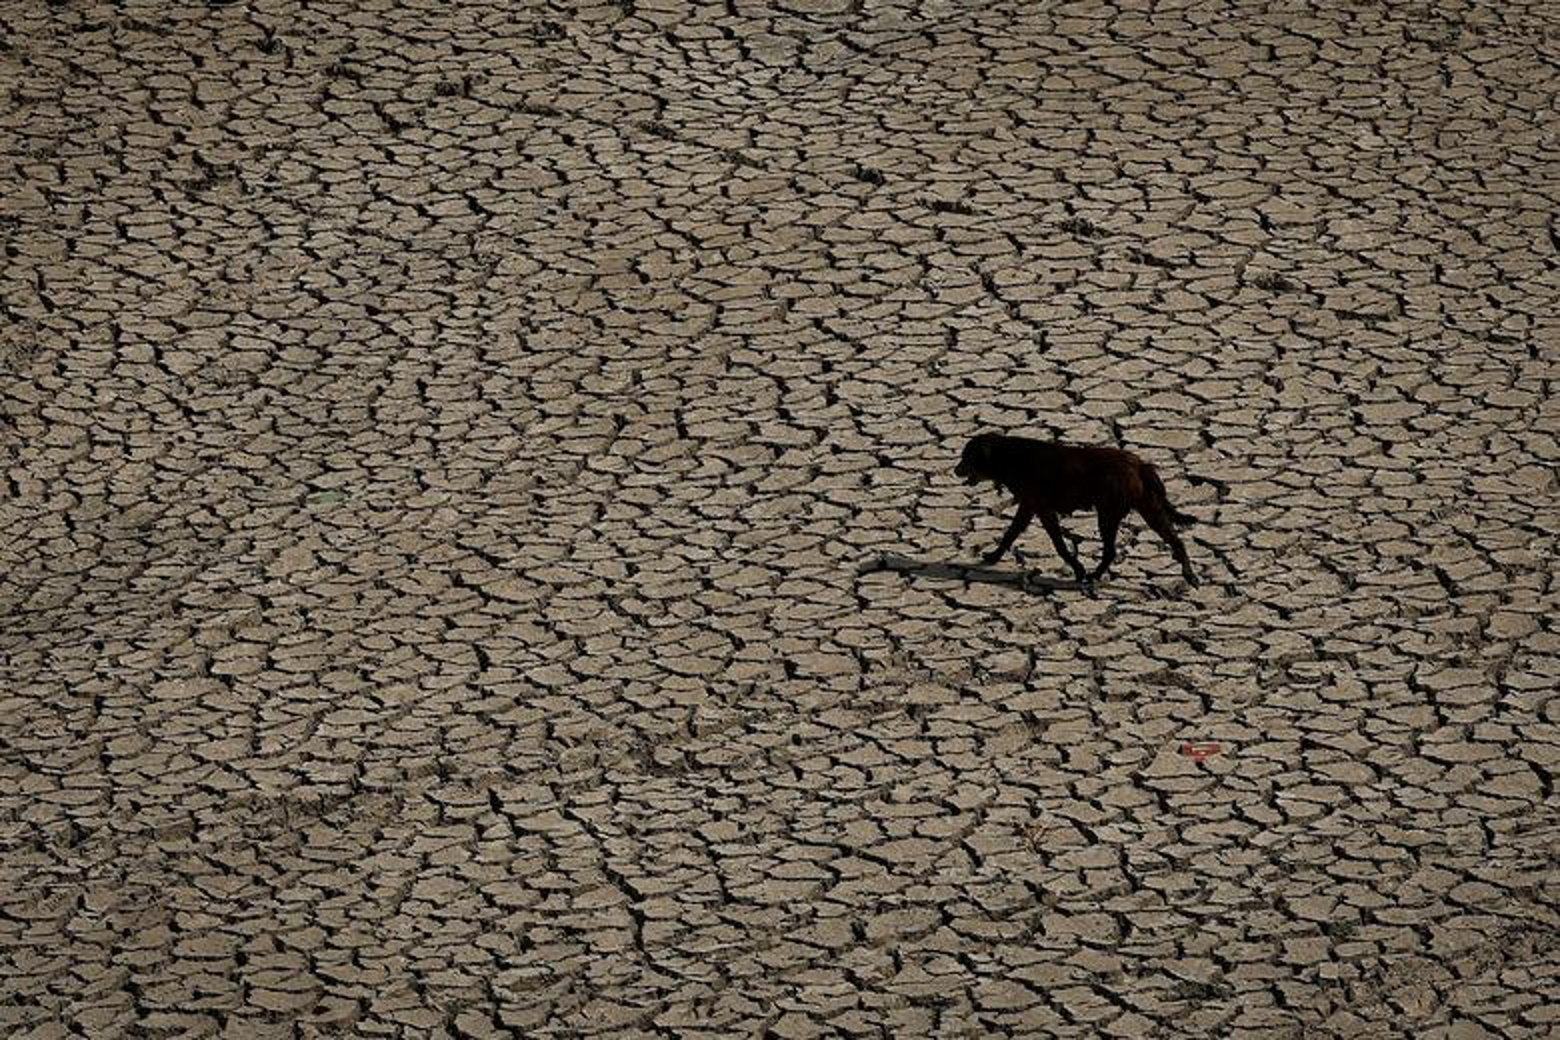 A dog walks on an almost dry river bed of Yamuna during a heatwave in New Delhi, India, 2 May 2022. Photo: Adnan Abidi / REUTERS